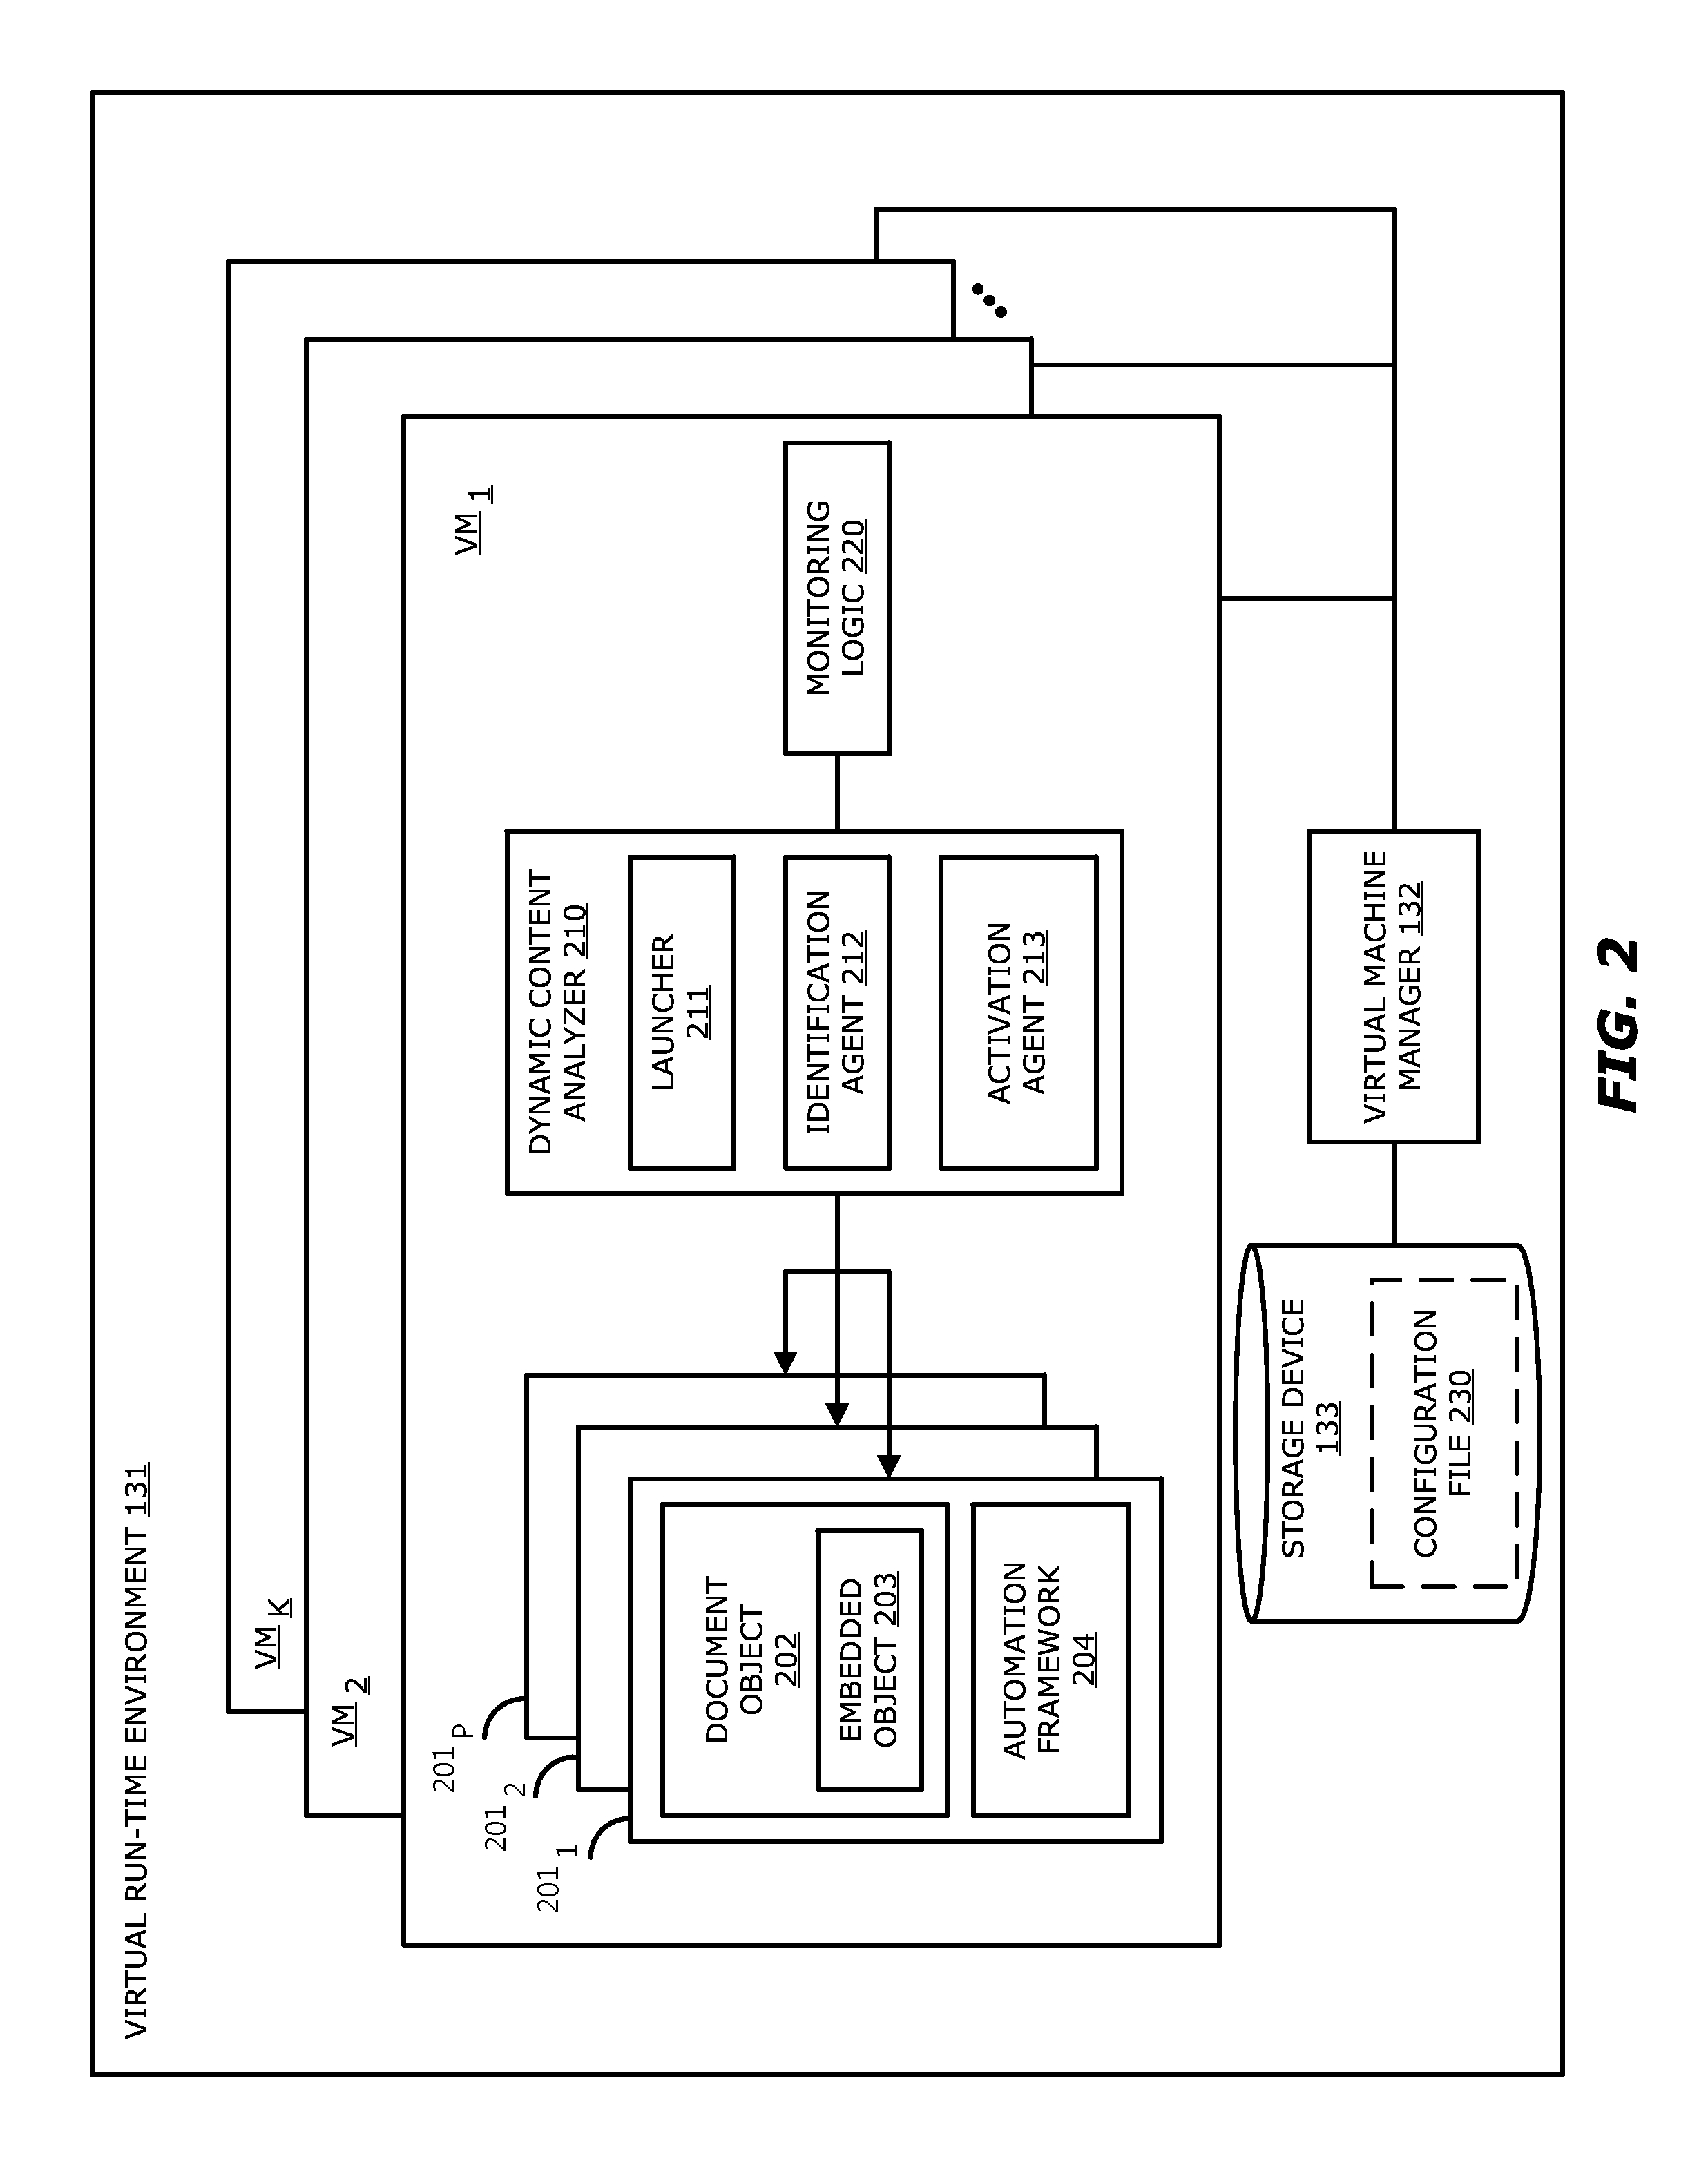 Dynamic content activation for automated analysis of embedded objects